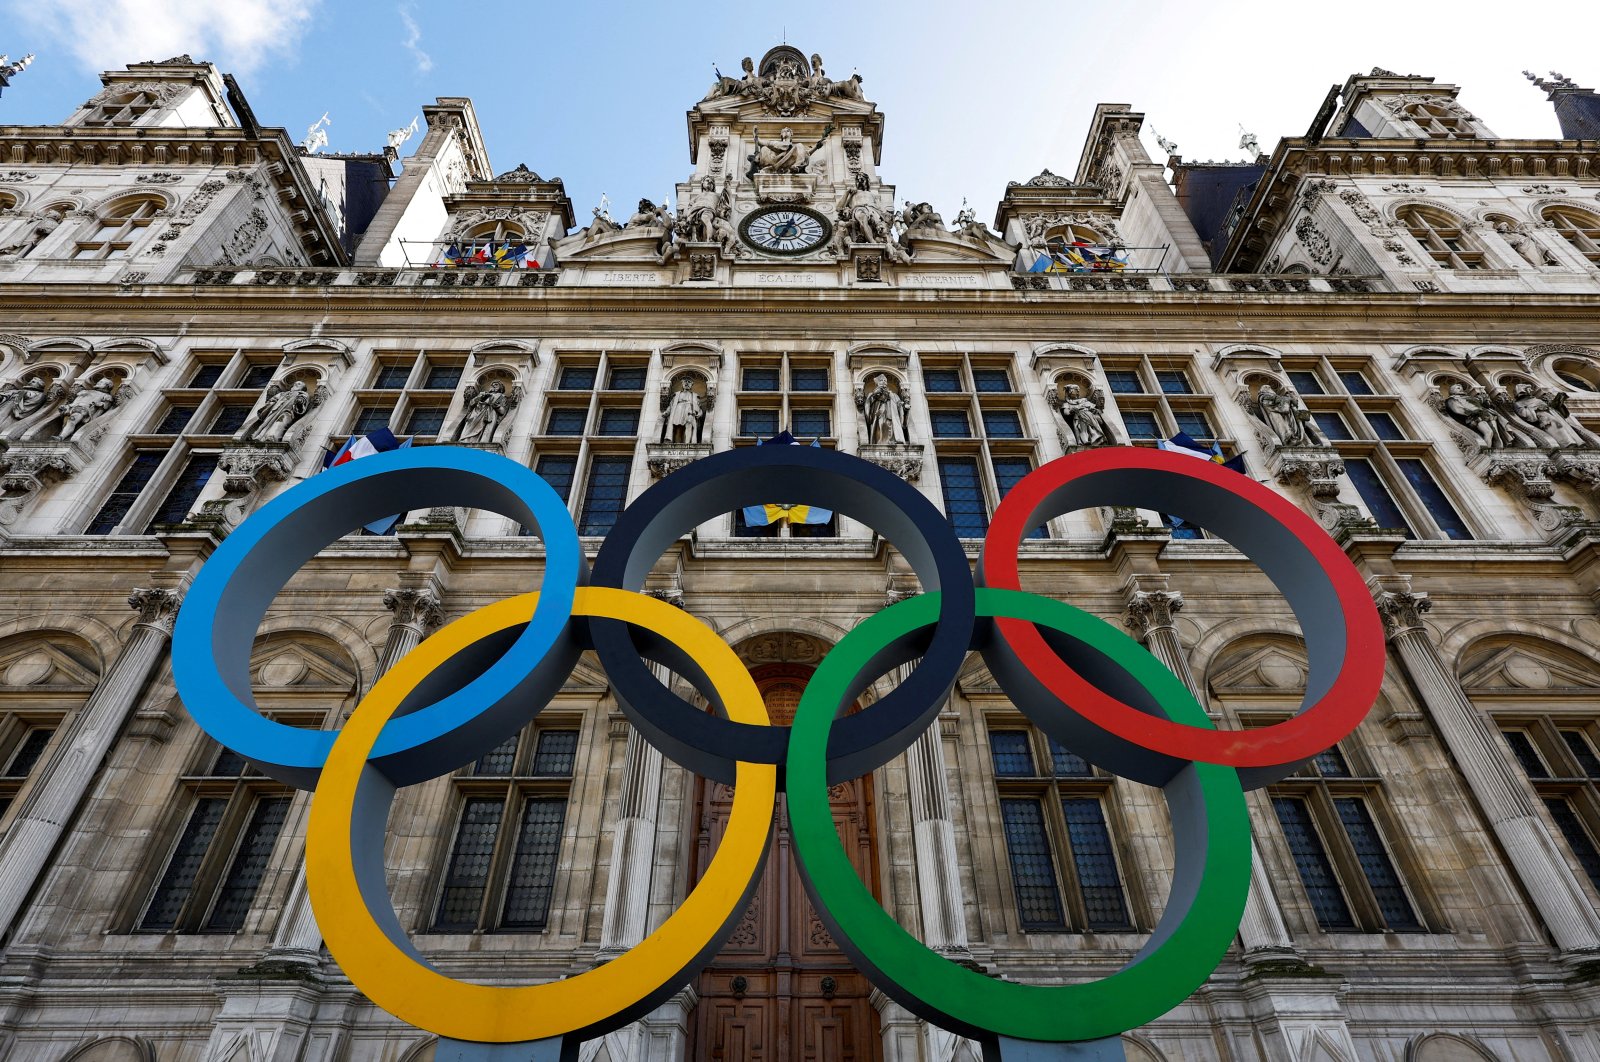 The Olympic rings are seen in front of the Hotel de Ville City Hall, Paris, France, March 14, 2023. (Reuters Photo)